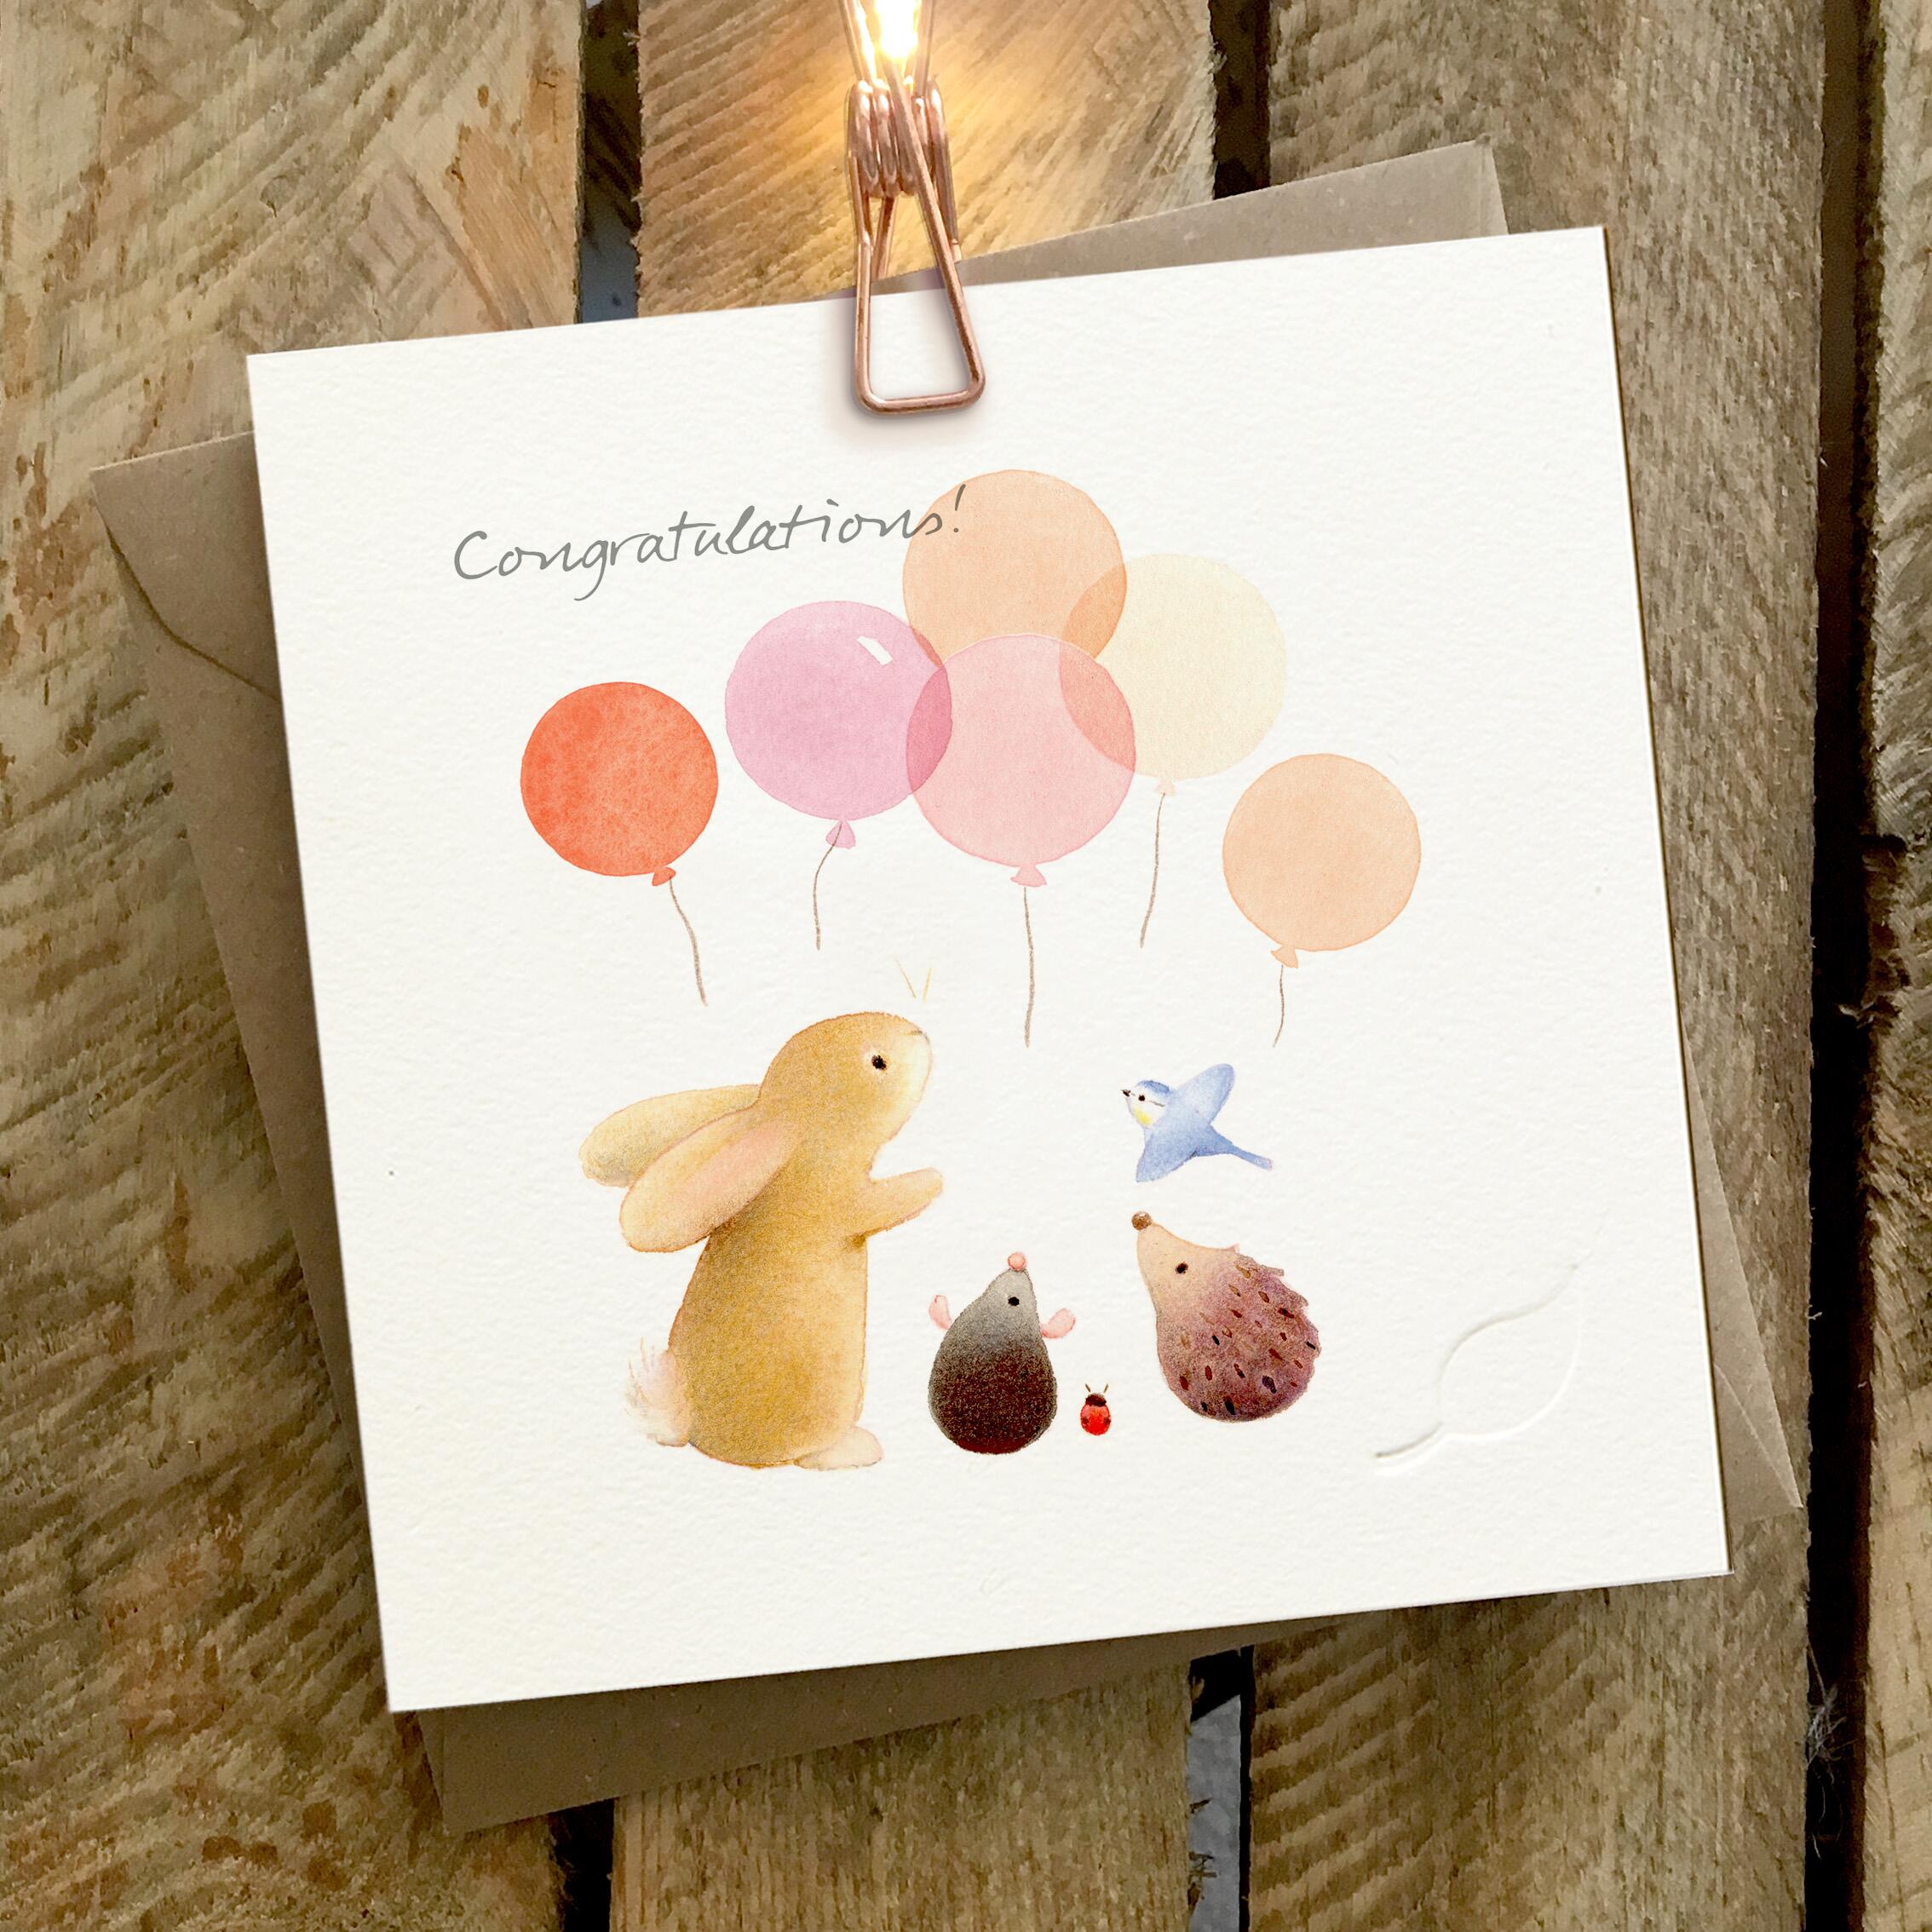 Card featuring a group of cute animals with balloons. Caption reads “Congratulations”